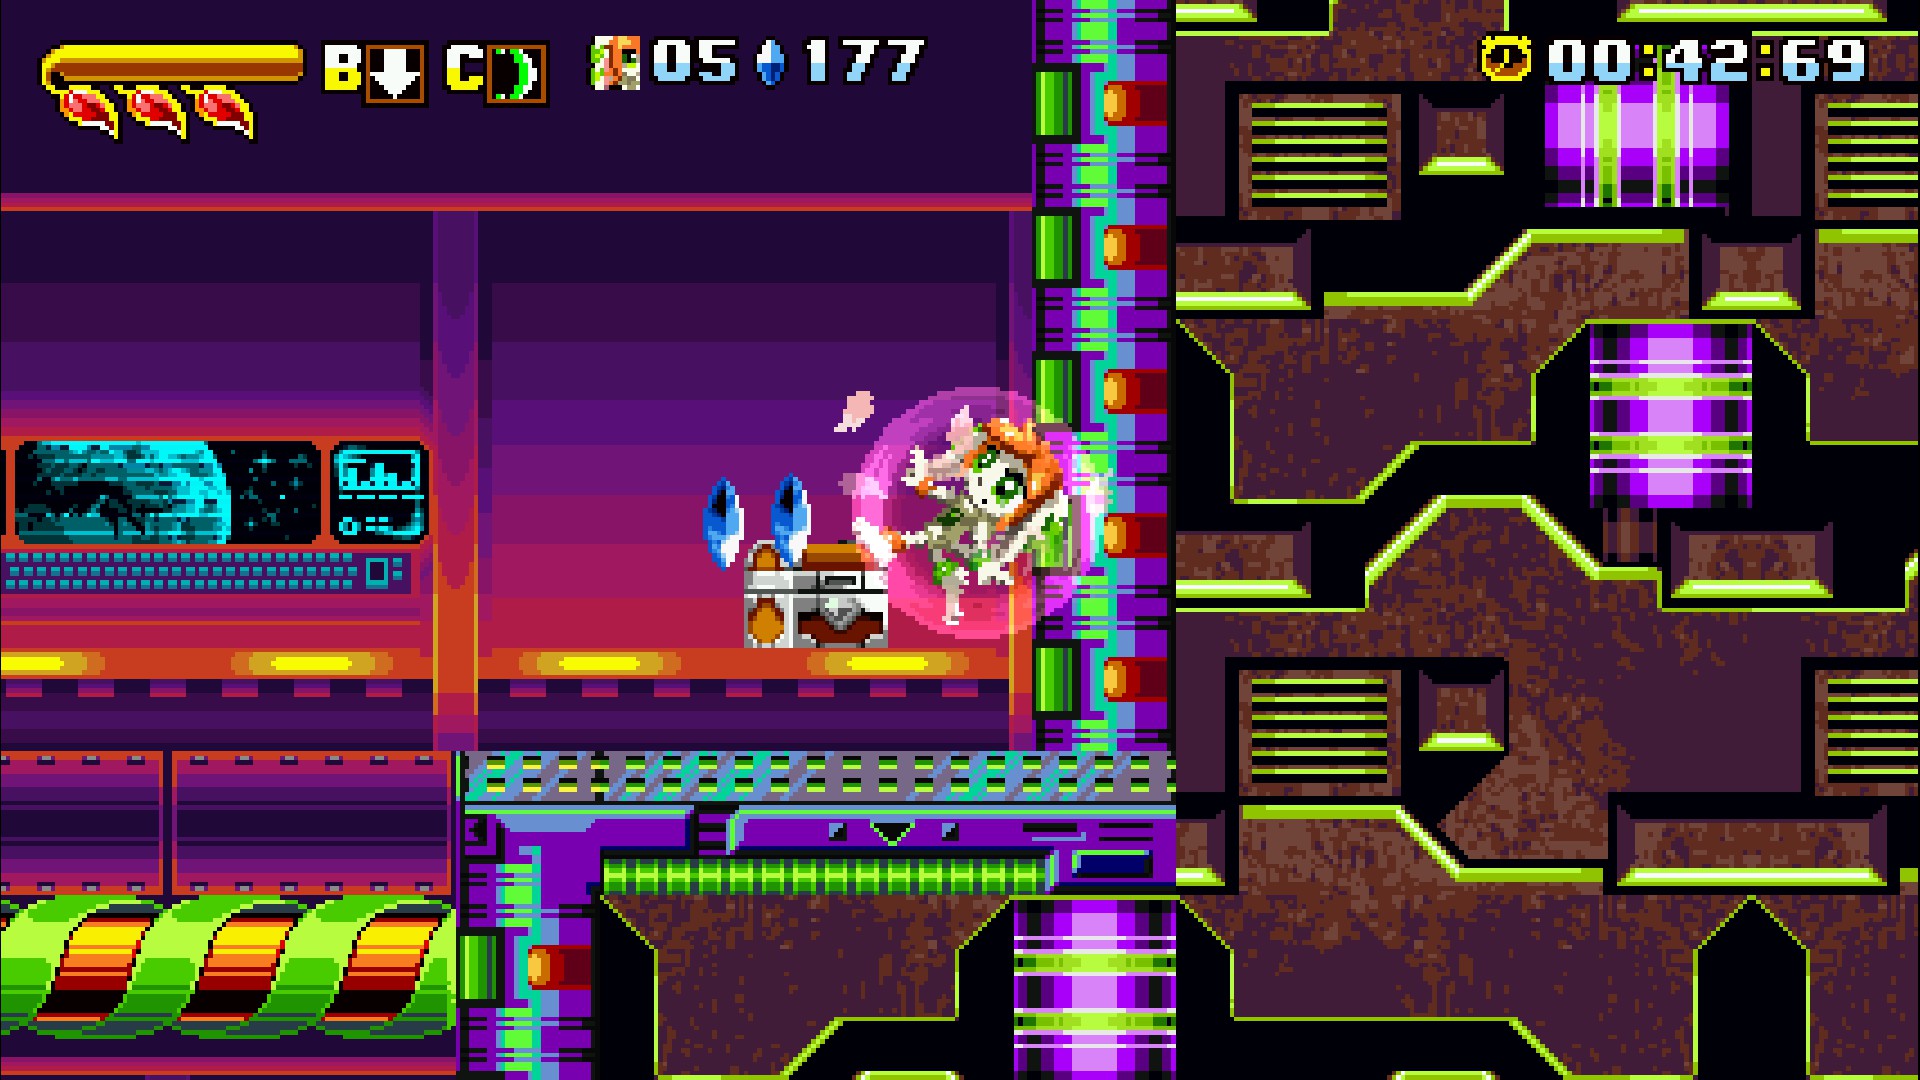 download steam freedom planet for free